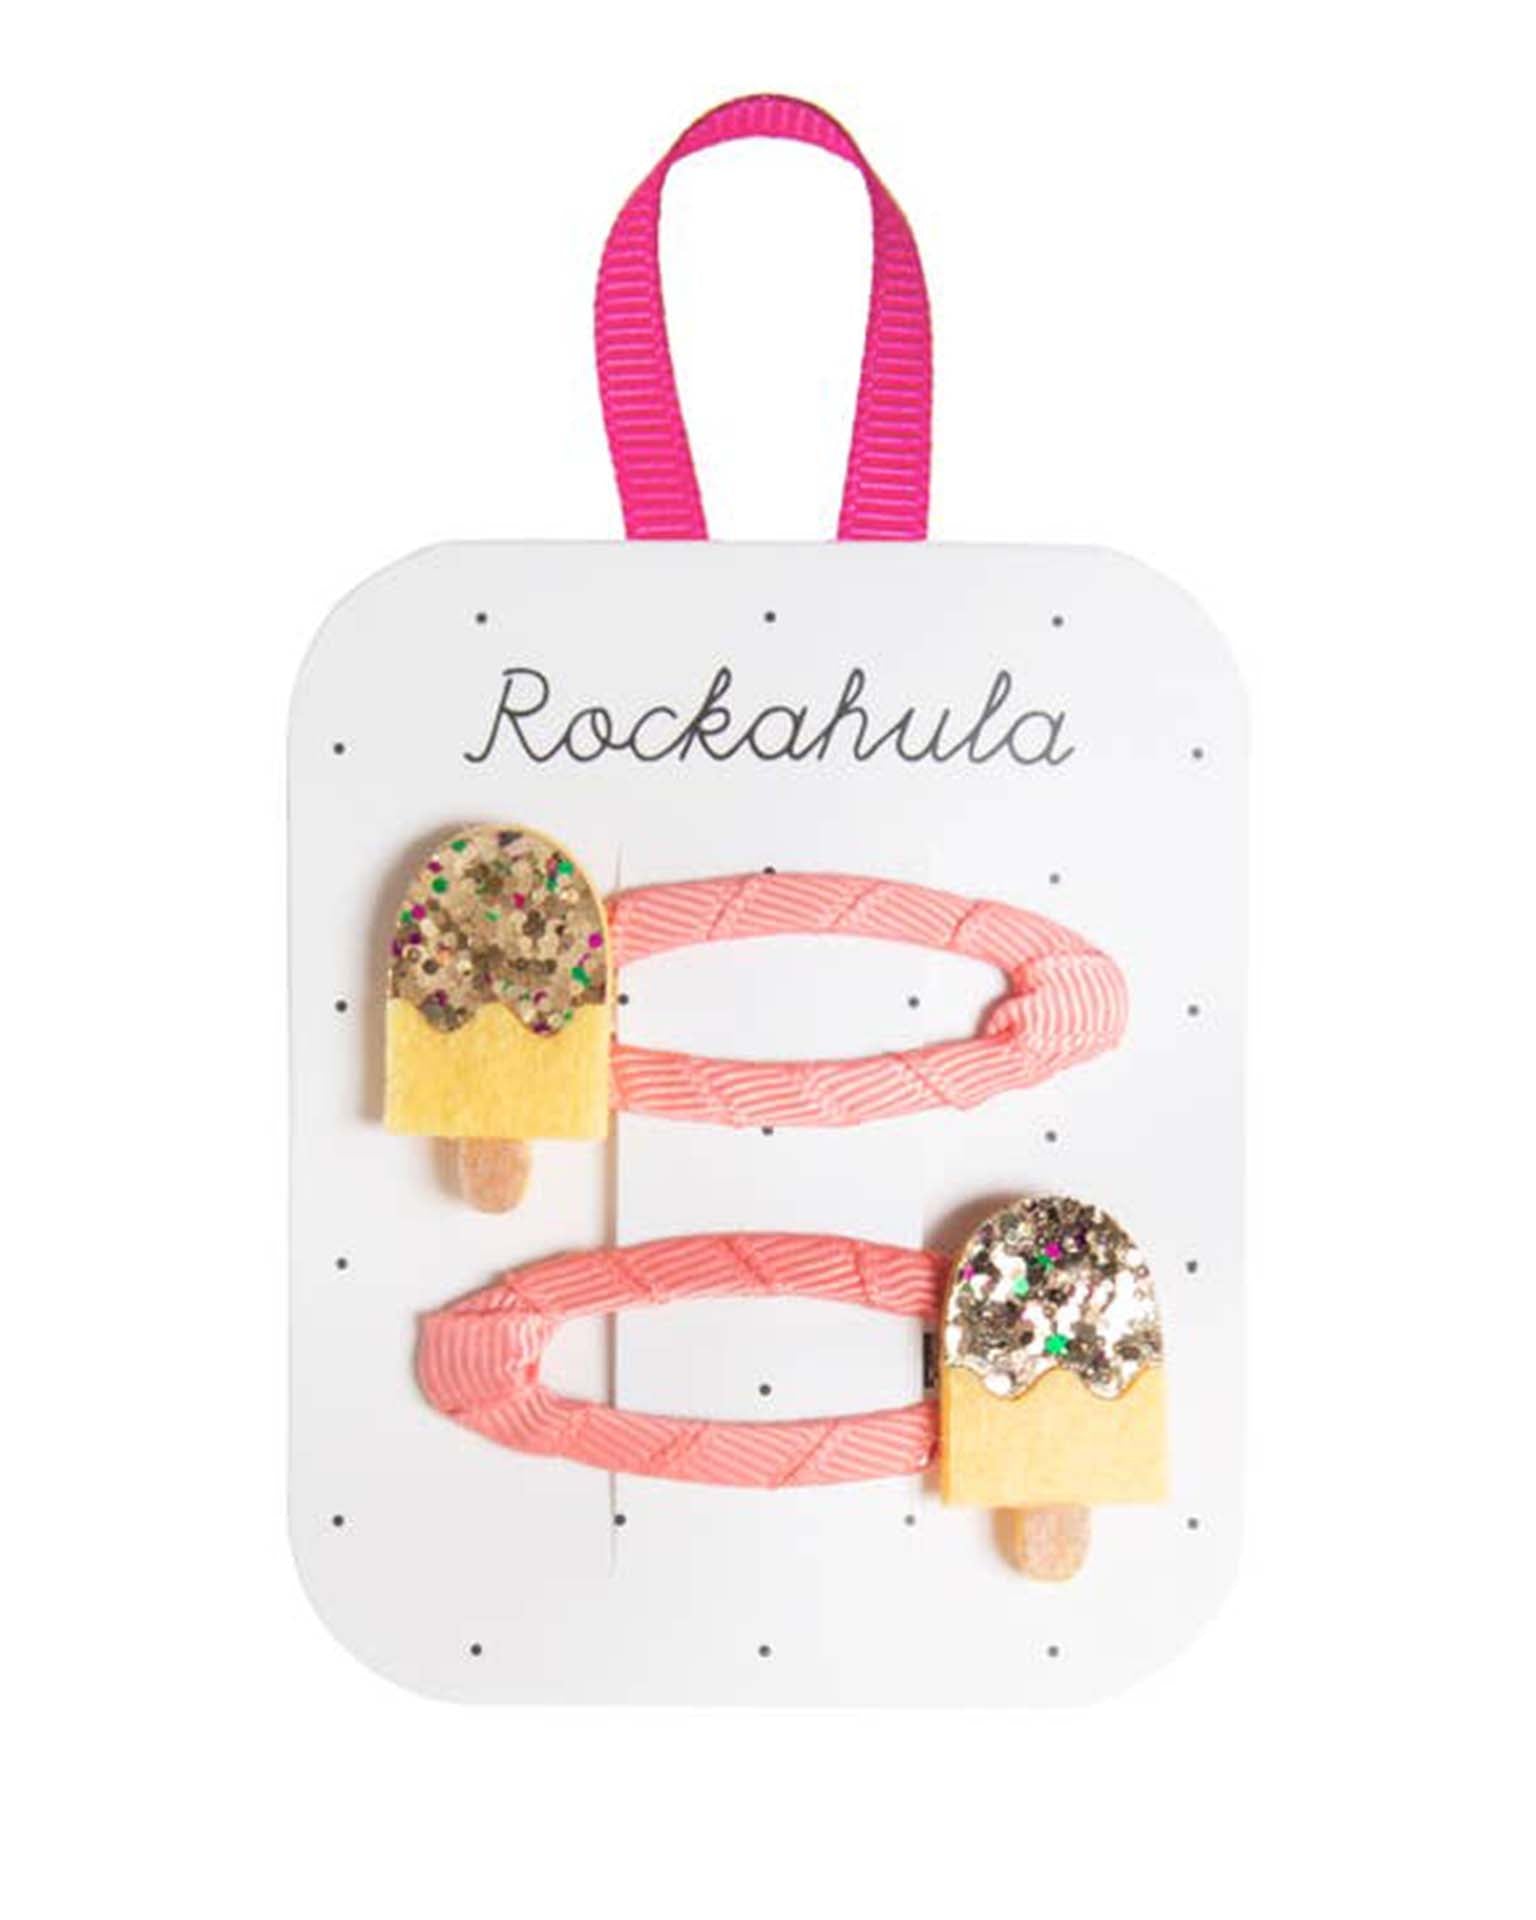 Little rockahula kids accessories lolly clips